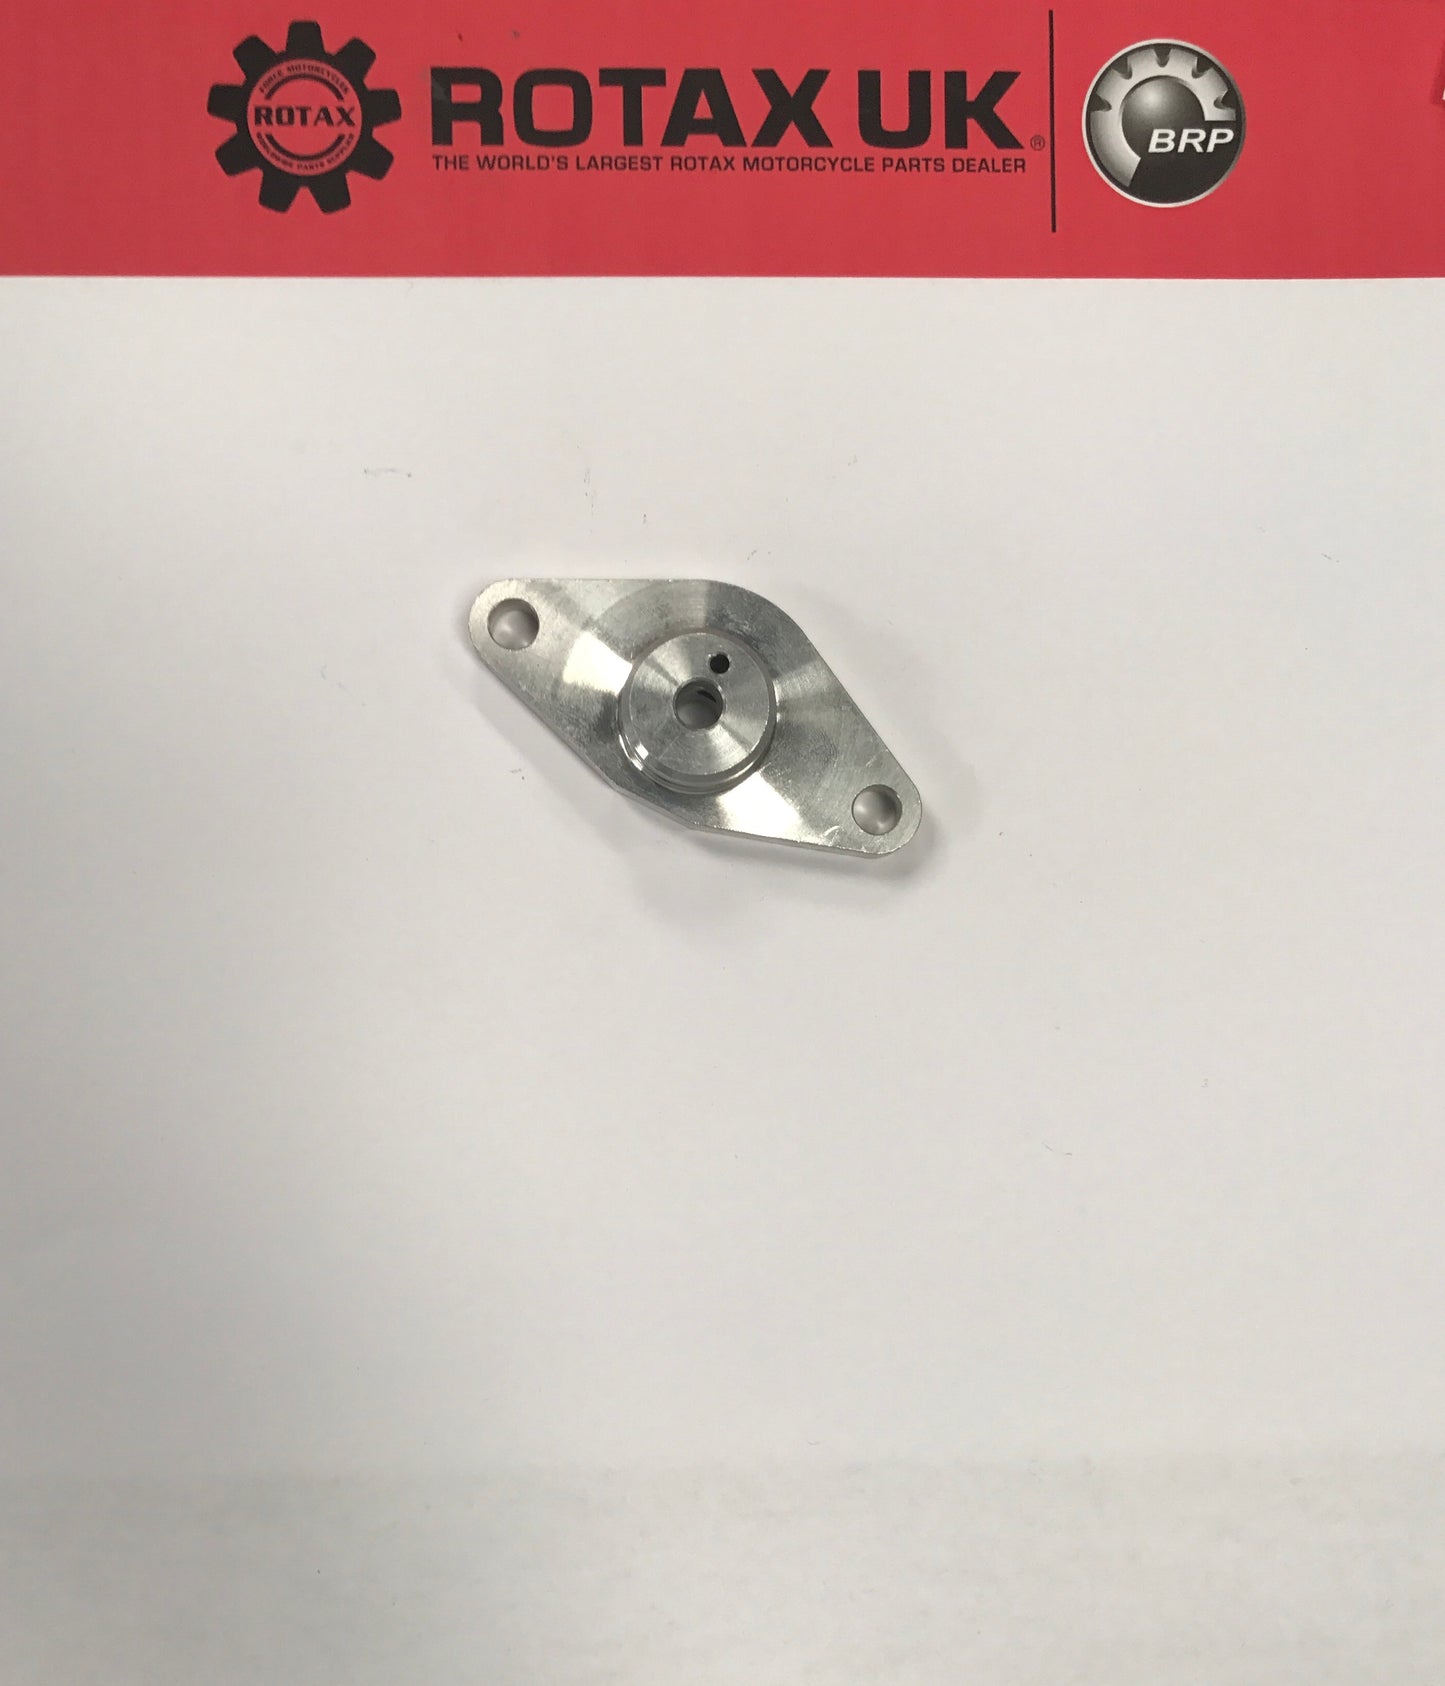 253695 -  Rotax Valve Rod Housing for engine types: 129, 258.